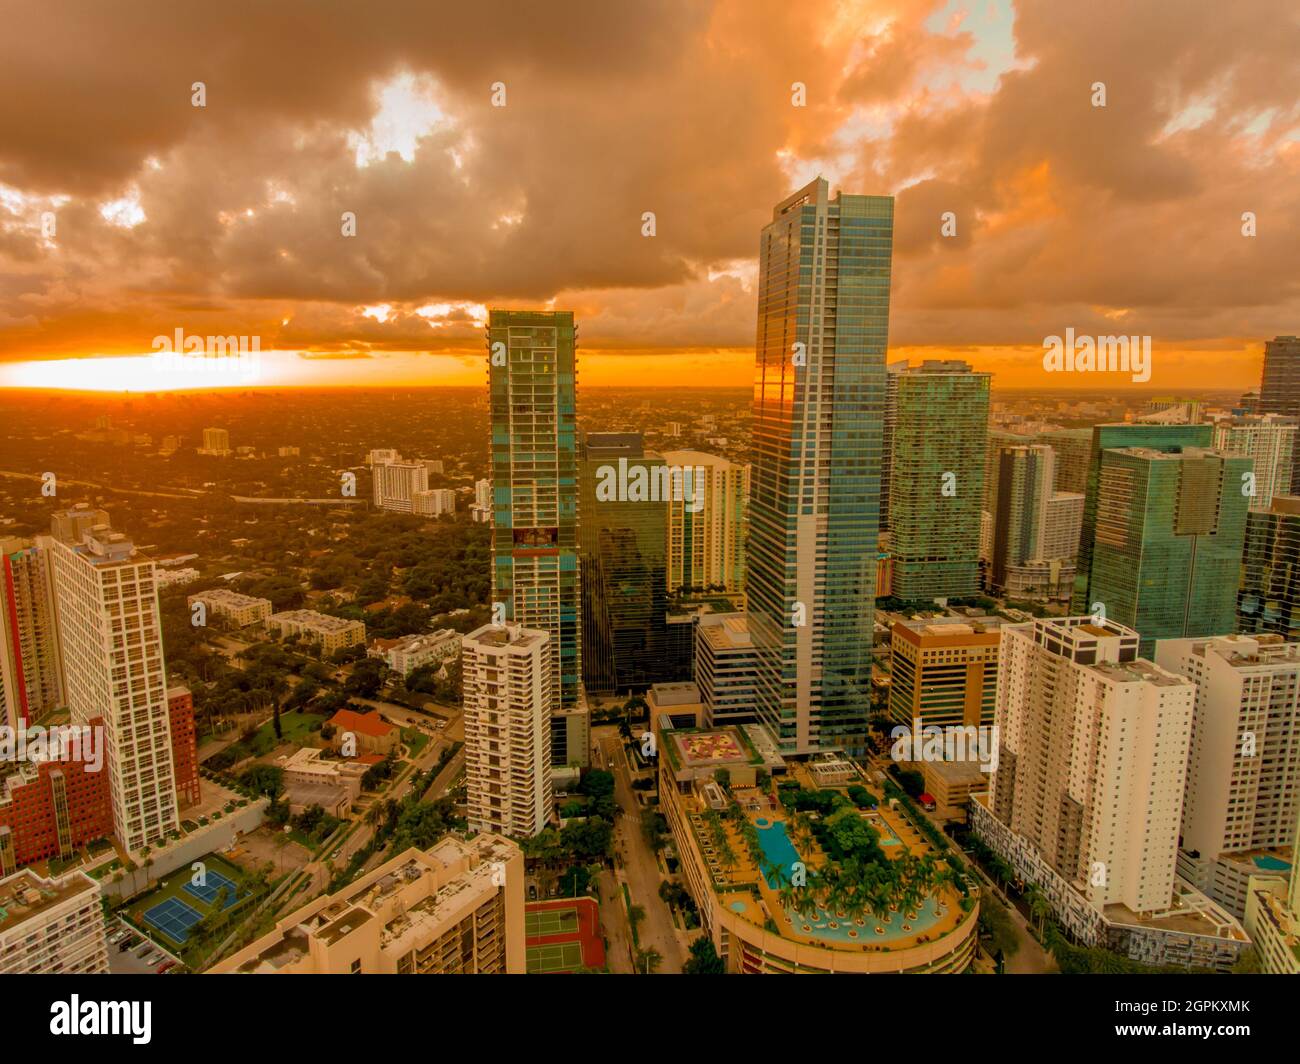 Aerial view of sunset from Brickell neighborhood in Miami, Florida with astounding clouds and urban landscape Stock Photo